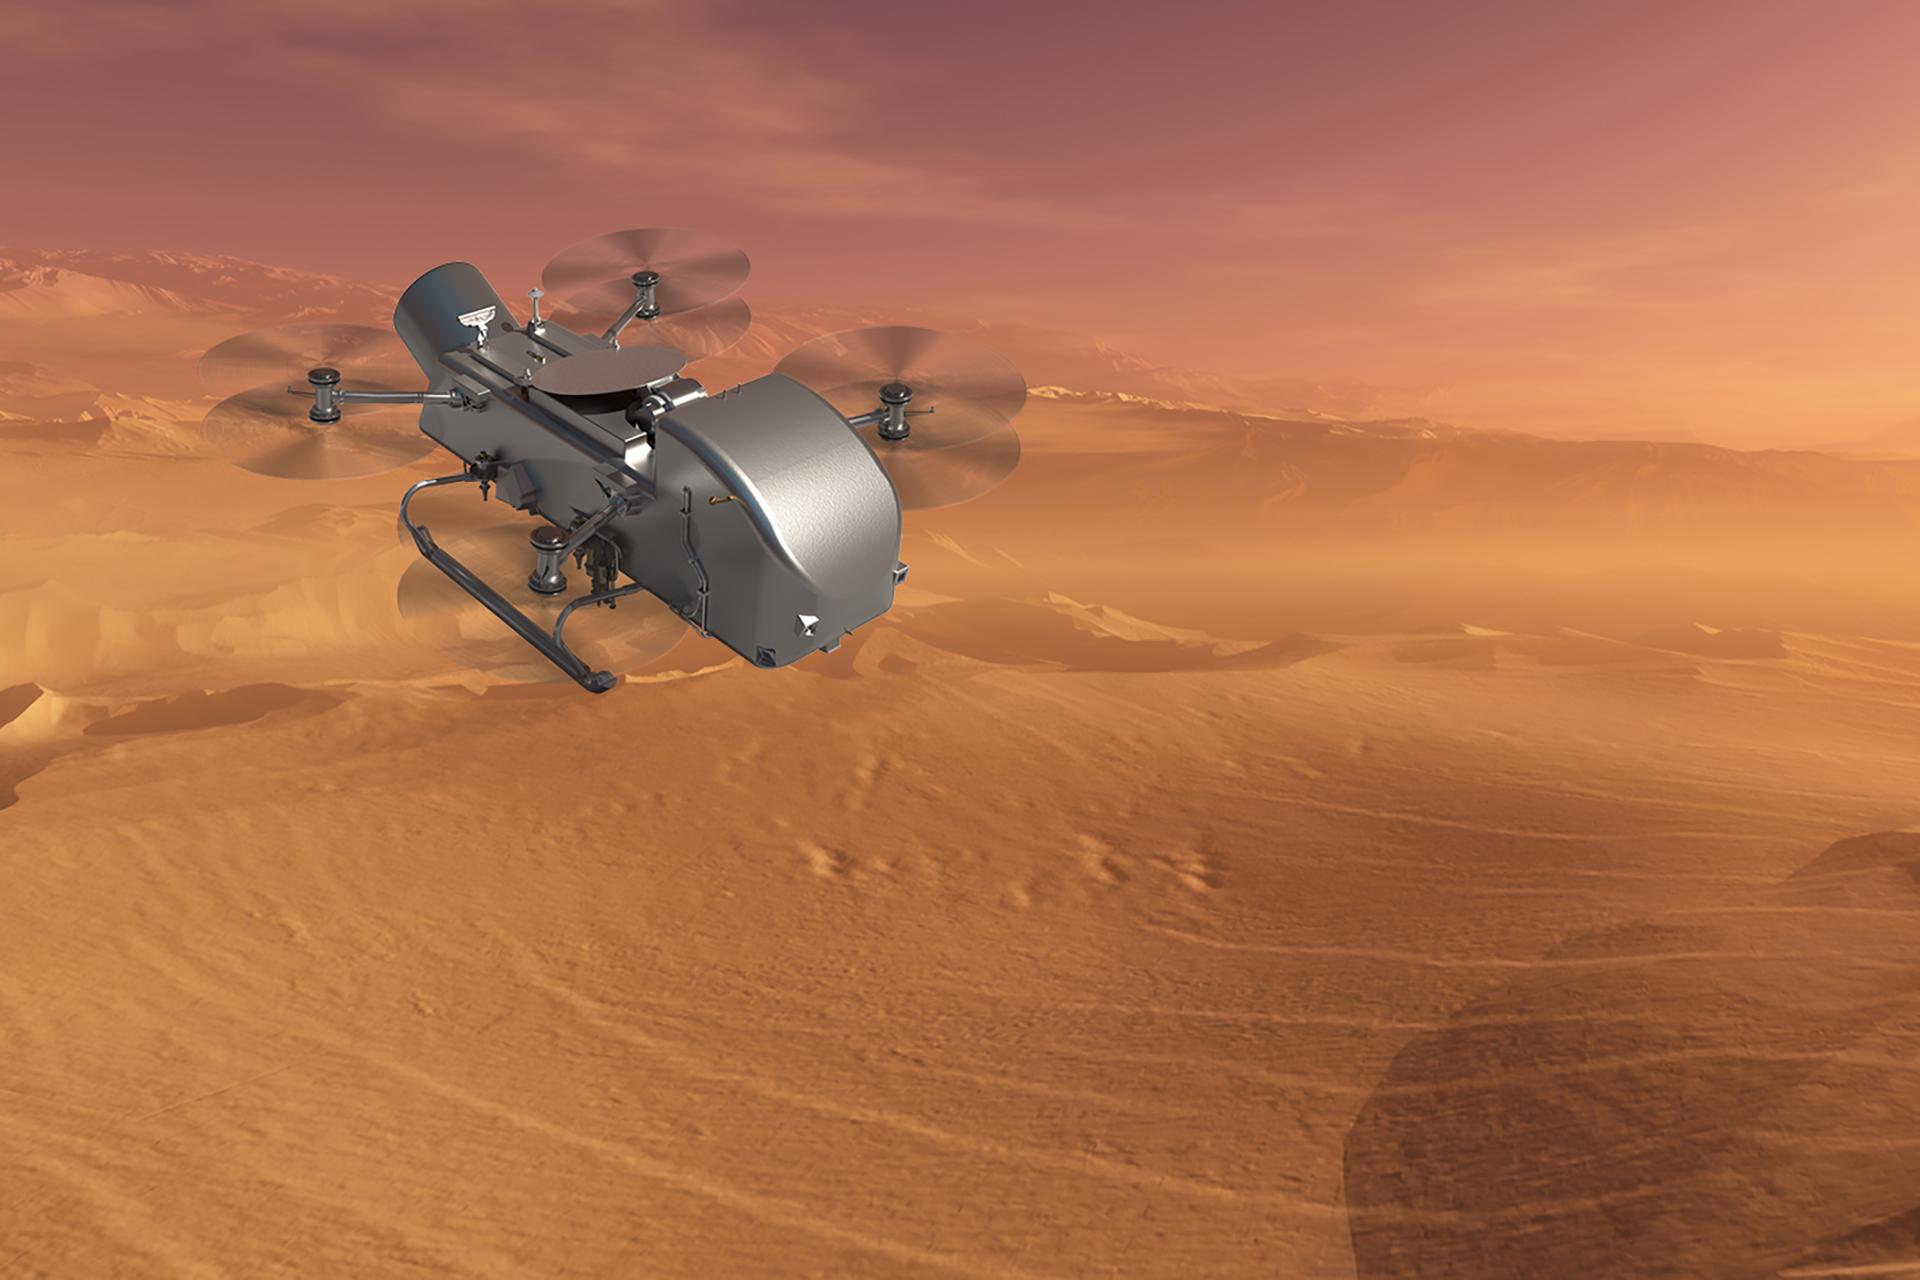 A silver drone-like rotocraft flies over a desert of tan-colored dunes and a hazy, orange sky